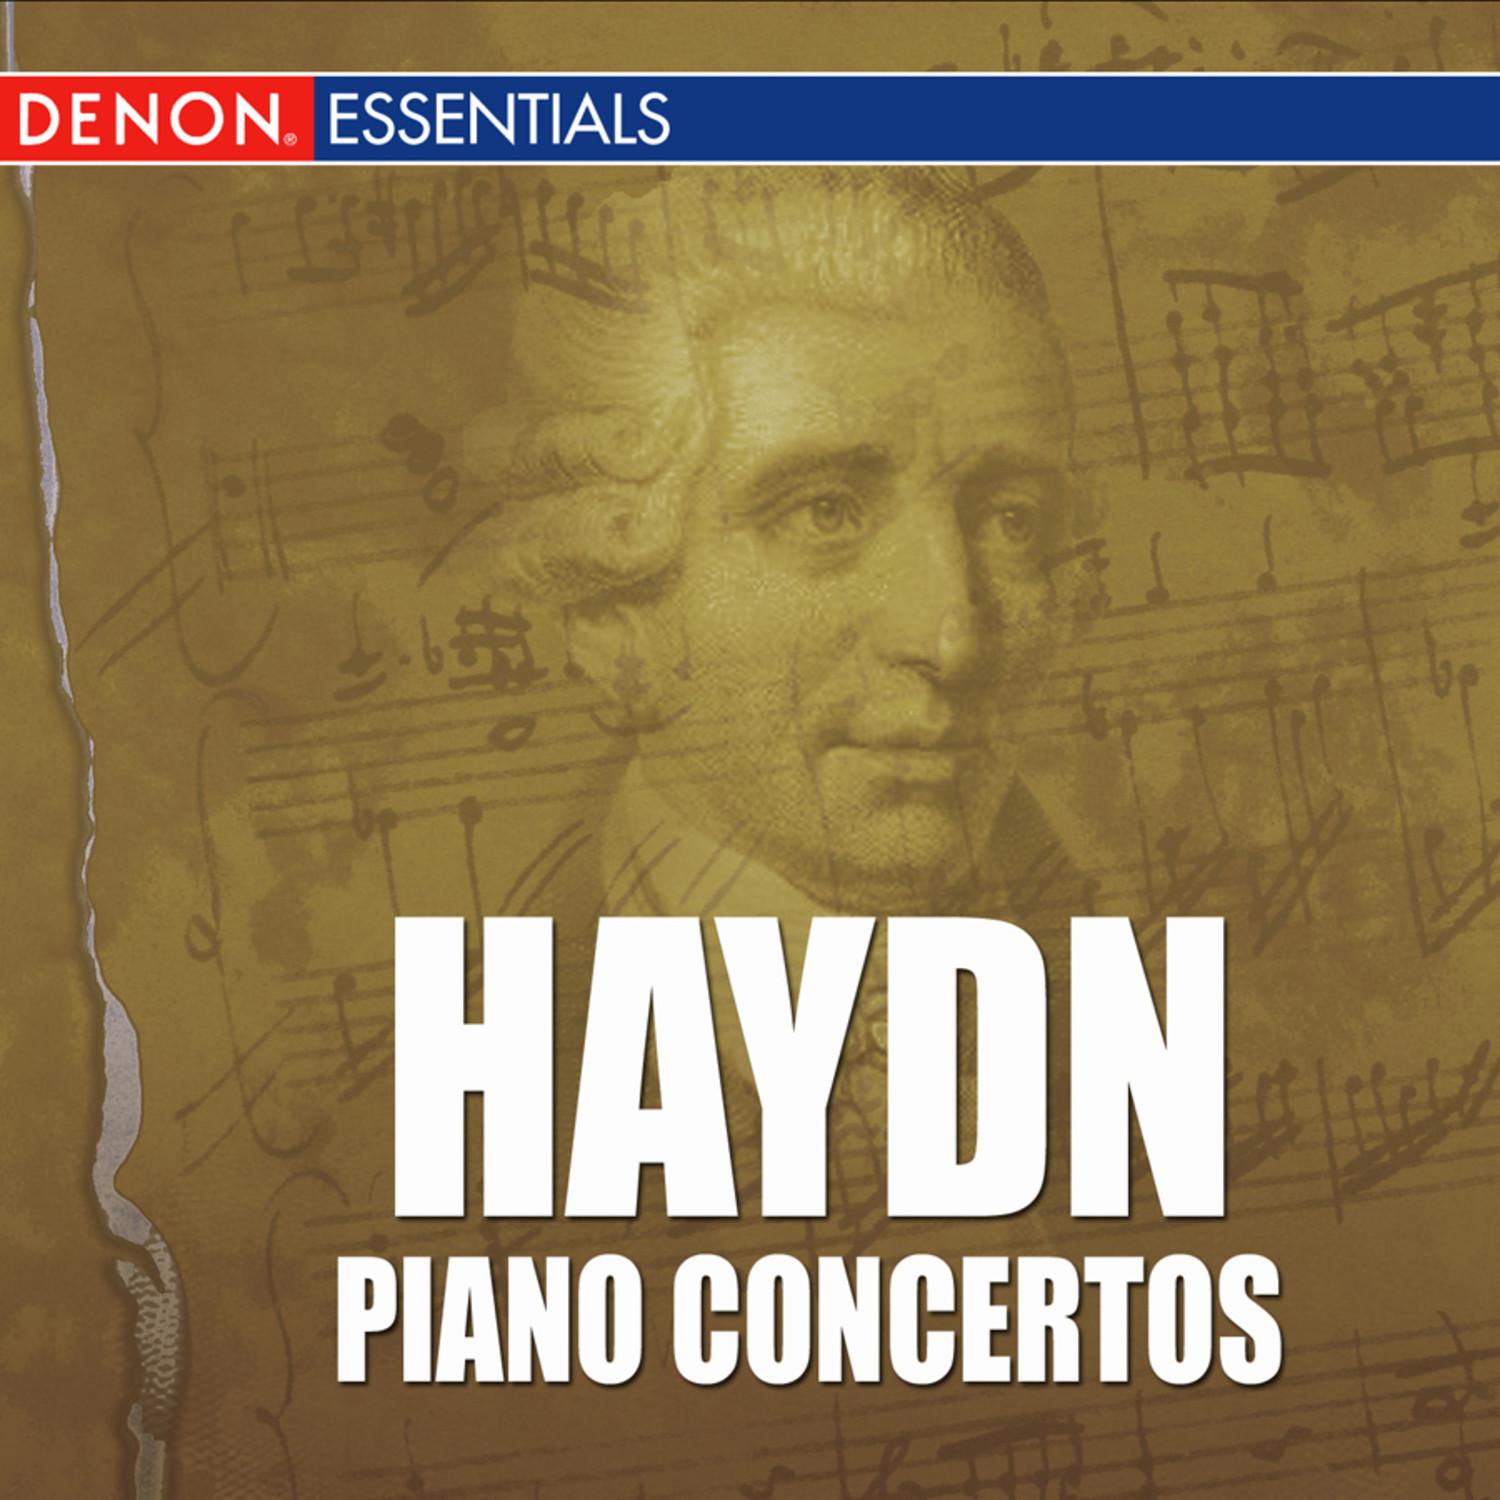 Concerto for Piano and Strings, No. 11 in D Major Hob XVIII:11: I. Vivace